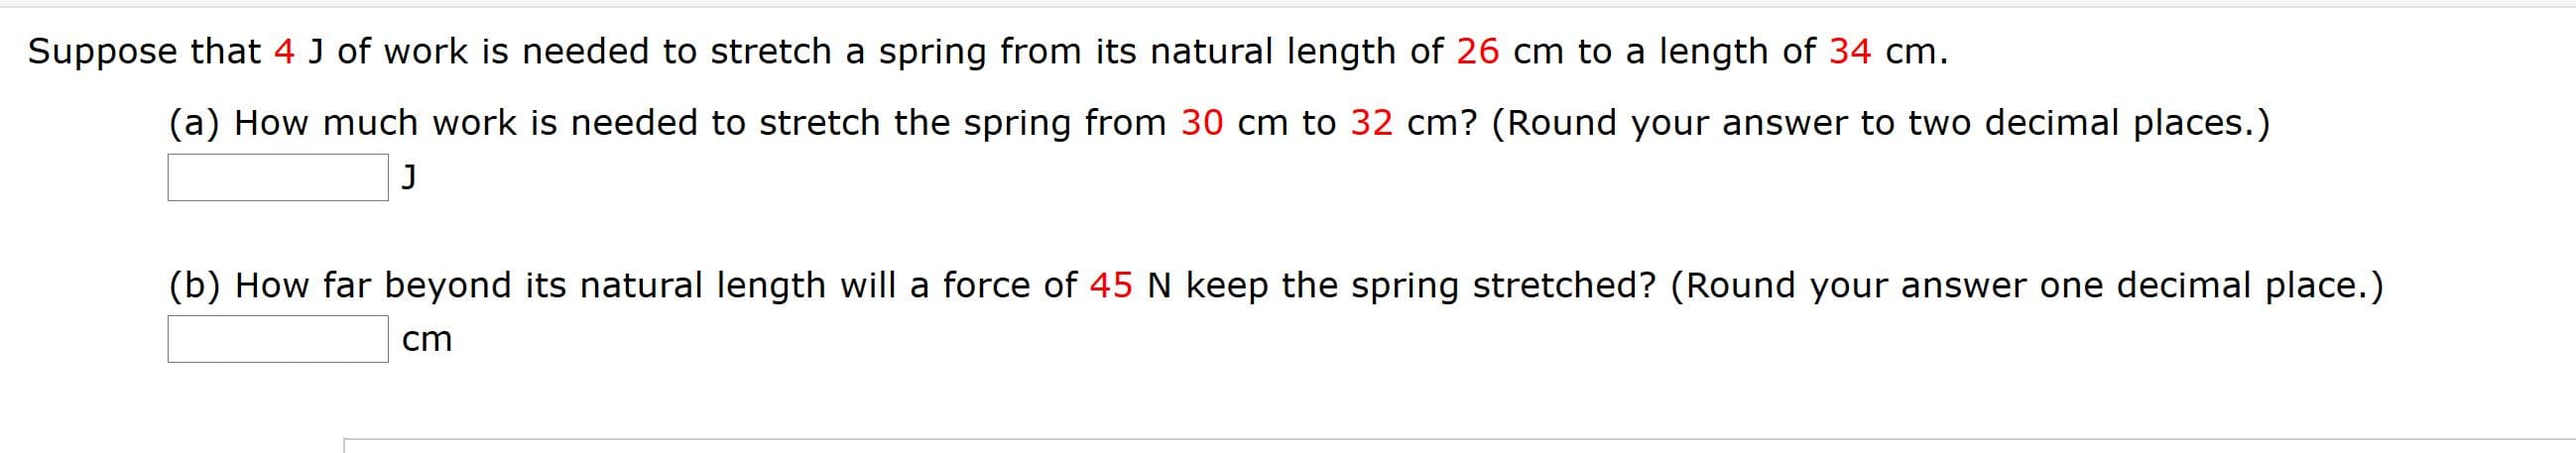 Suppose that 4 J of work is needed to stretch a spring from its natural length of 26 cm to a length of 34 cm.
(a) How much work is needed to stretch the spring from 30 cm to 32 cm? (Round your answer to two decimal places.)
J
(b) How far beyond its natural length will a force of 45 N keep the spring stretched? (Round your answer one decimal place.)
cm
